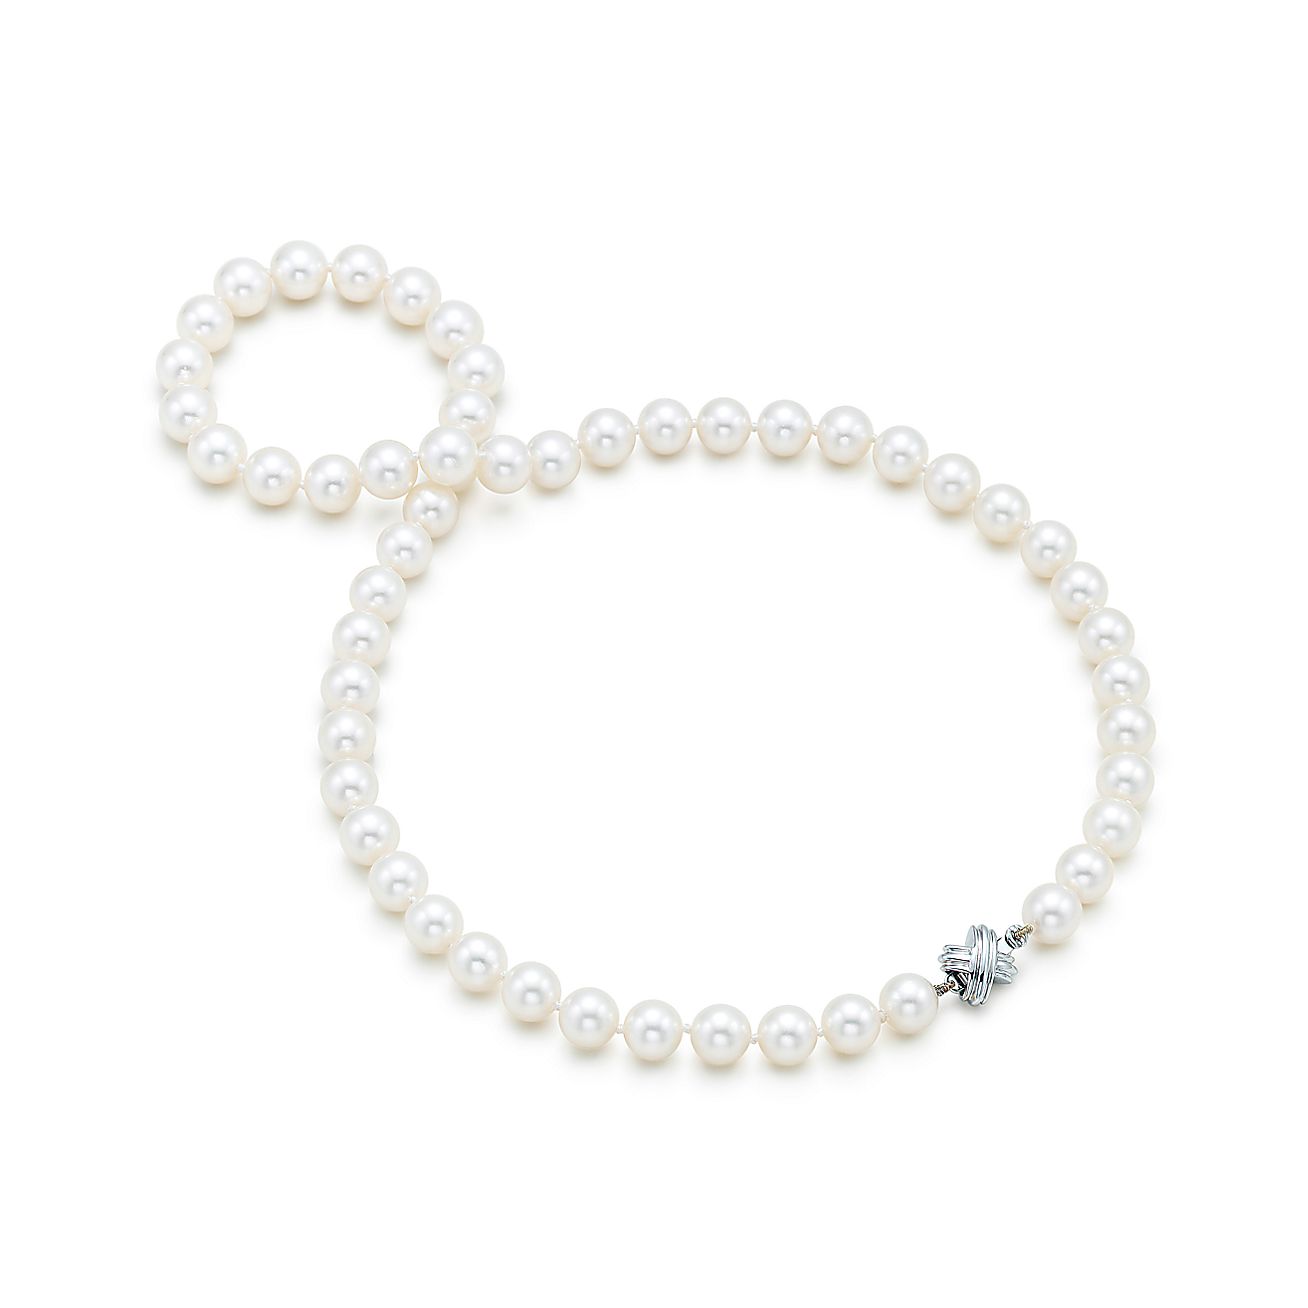 Tiffany Signature™ necklace of Akoya cultured pearls with 18k white ...